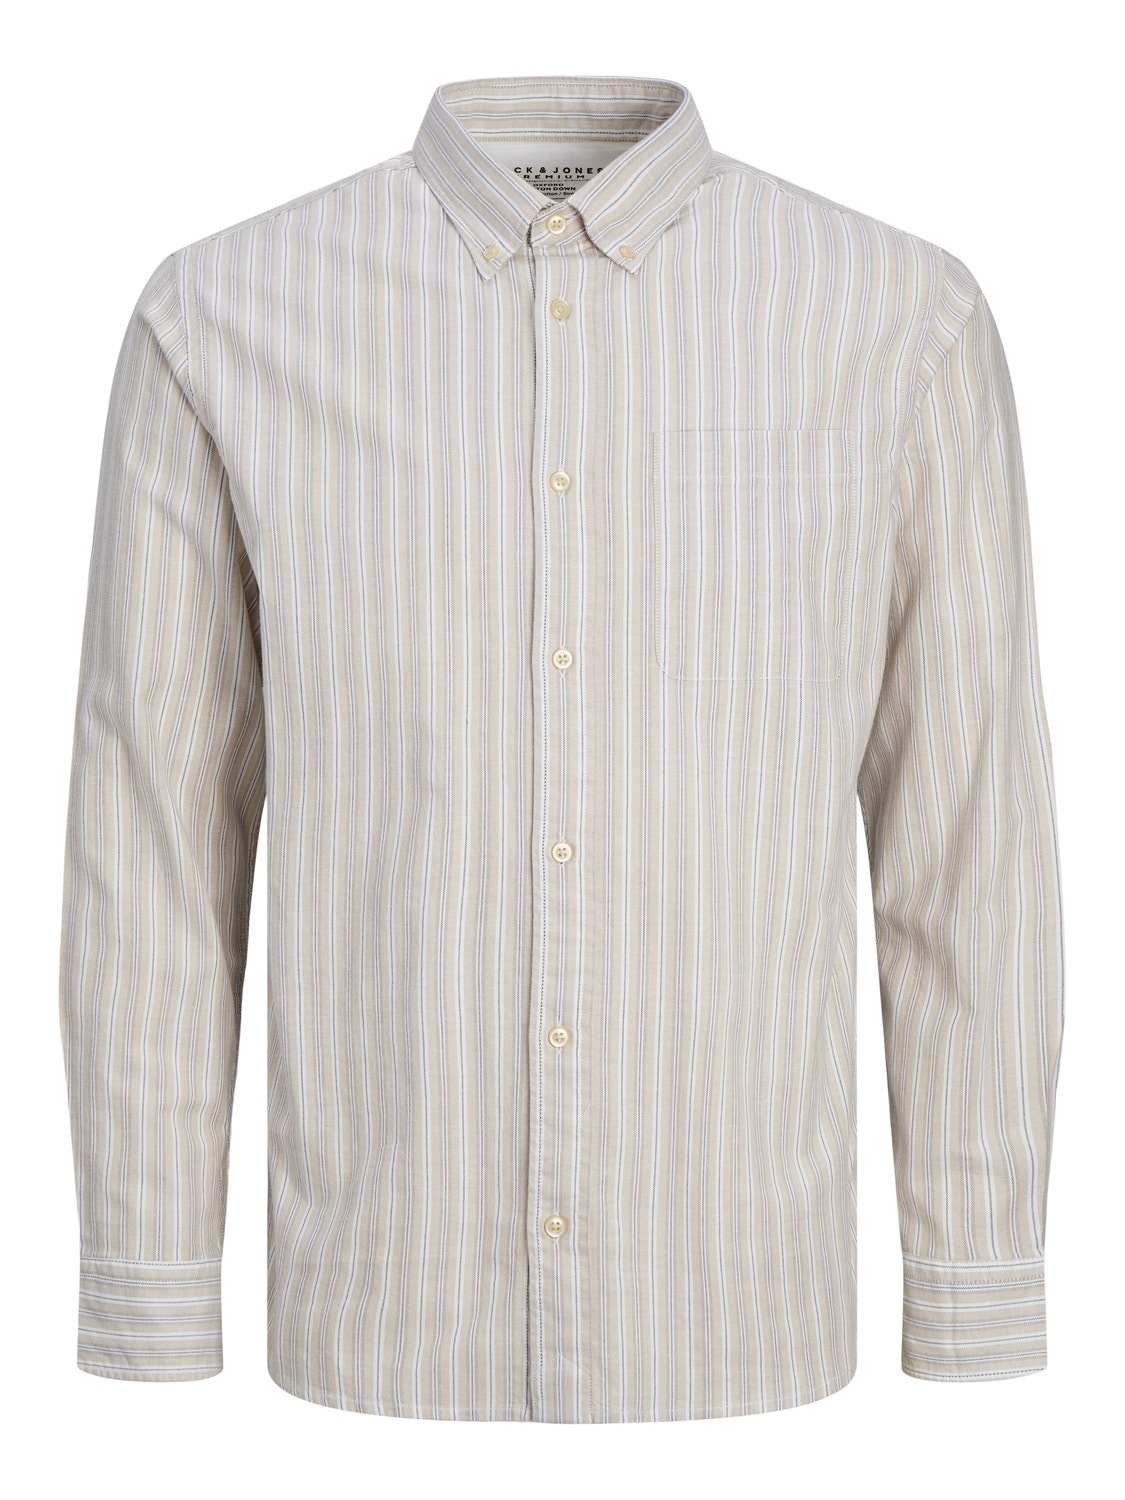 Jack & Jones Camicia formale Slim Fit -Timber Wolf  - 12192150